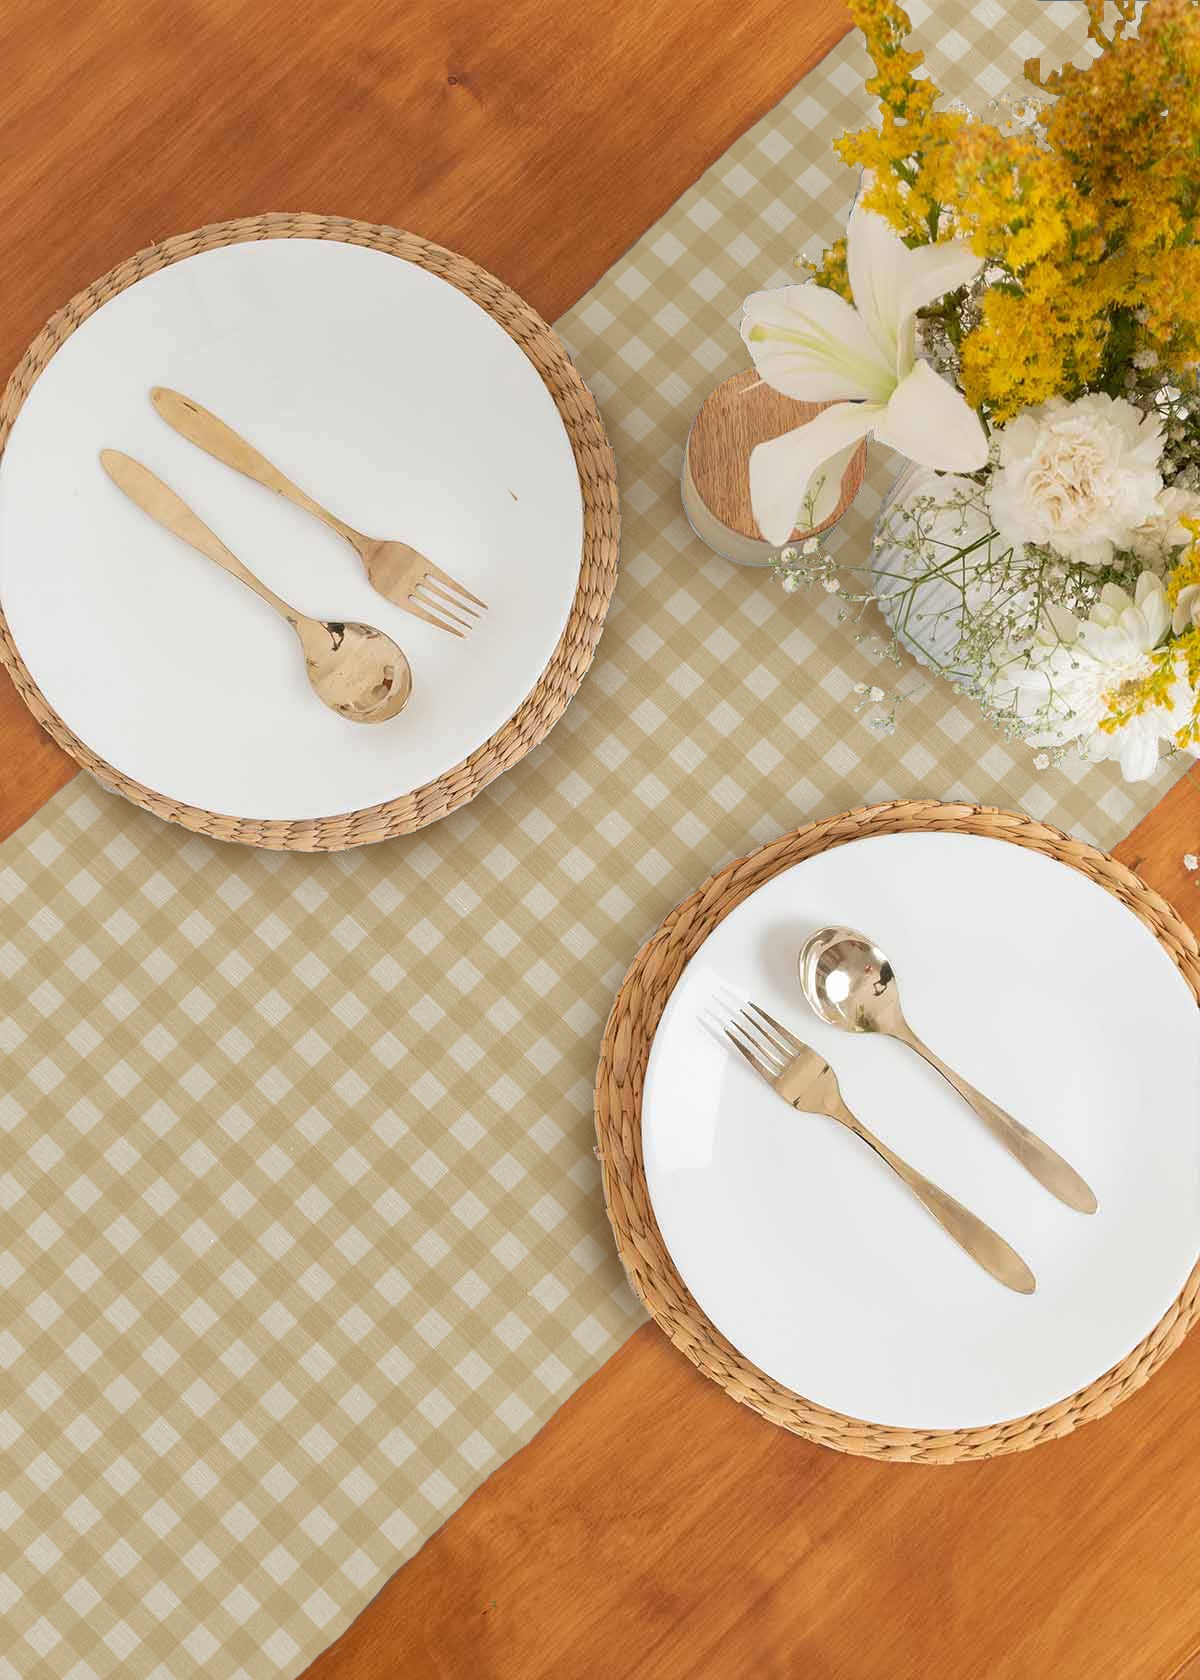 Gingham Printed Cotton Table Runner - Ivory